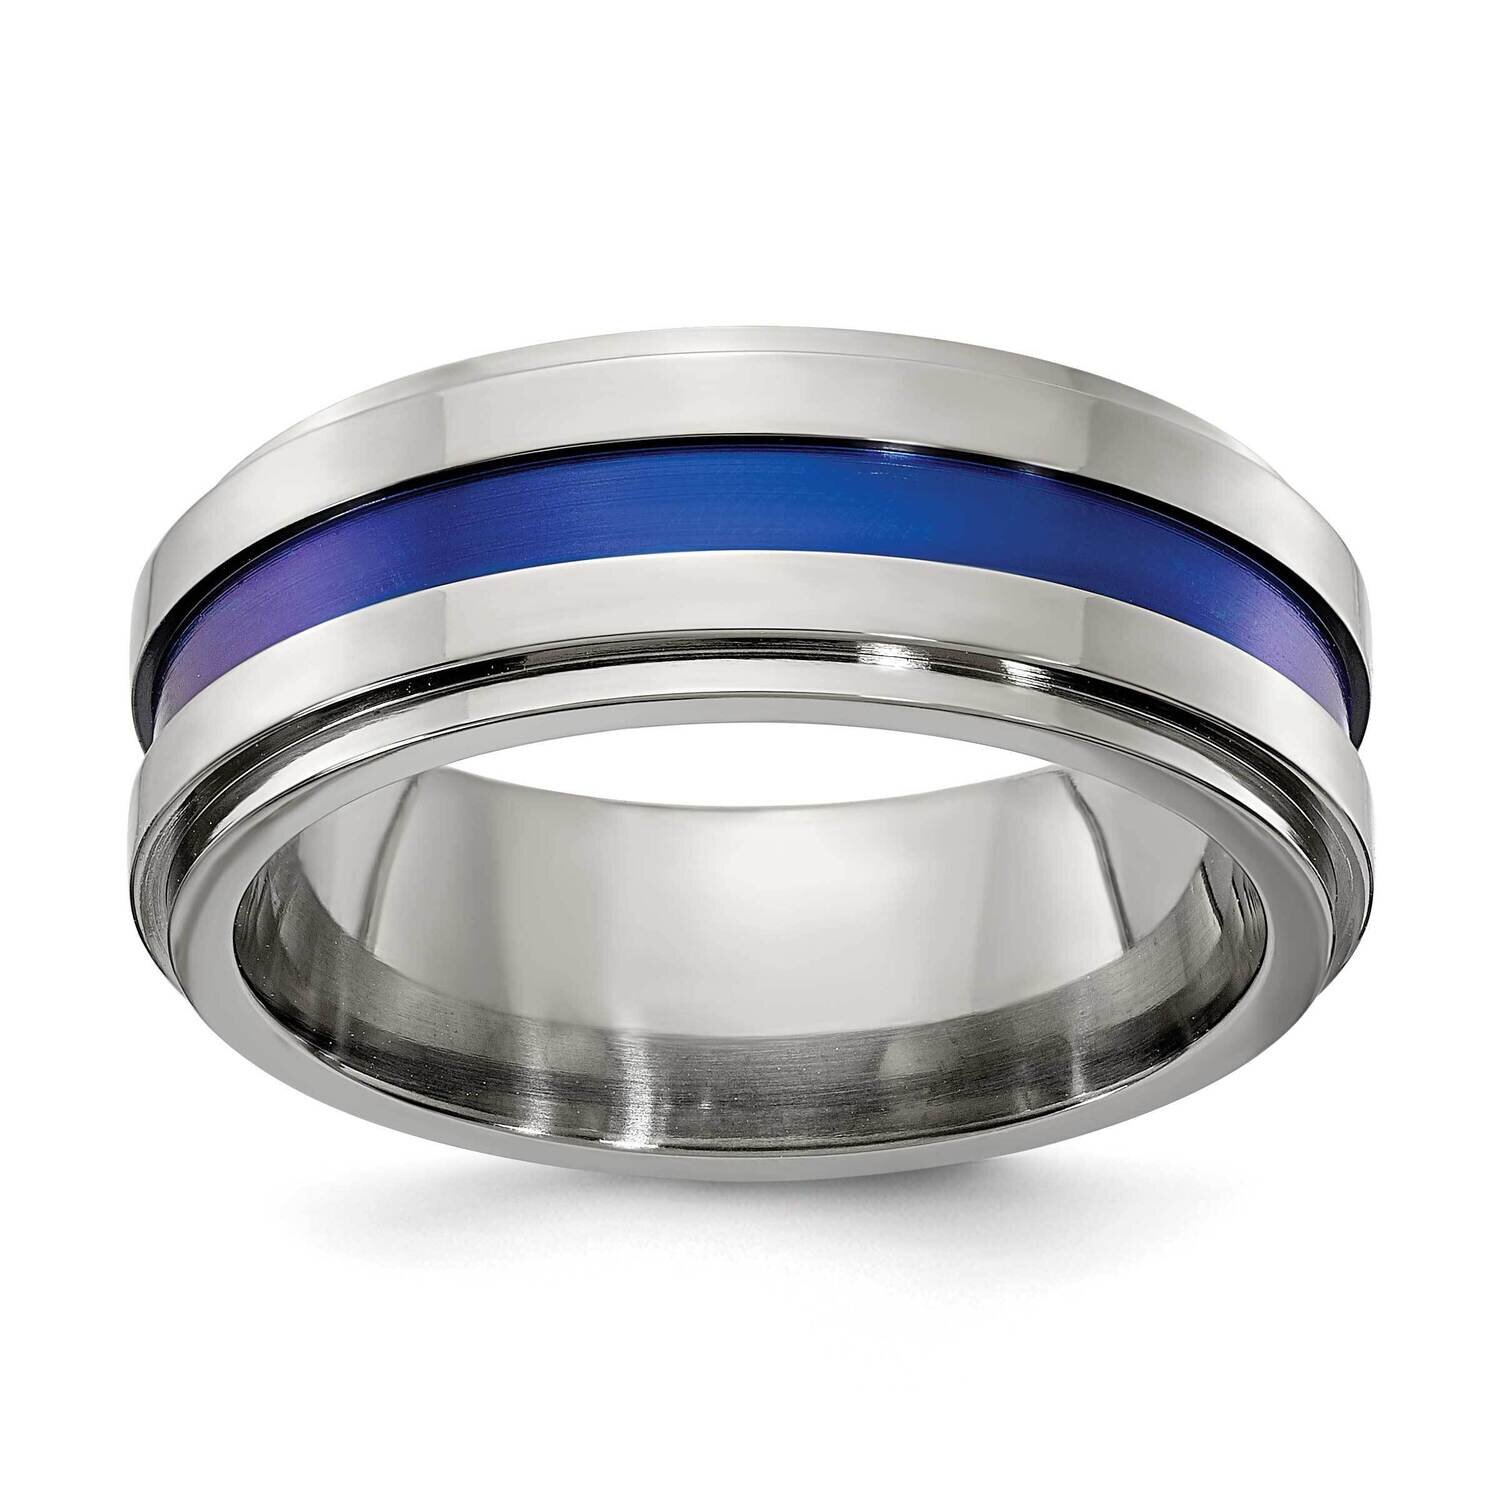 Edward Mirell Gray Titanium 8mm Blue Anodized Flat Grooved Engravable Band EMR103-8MM